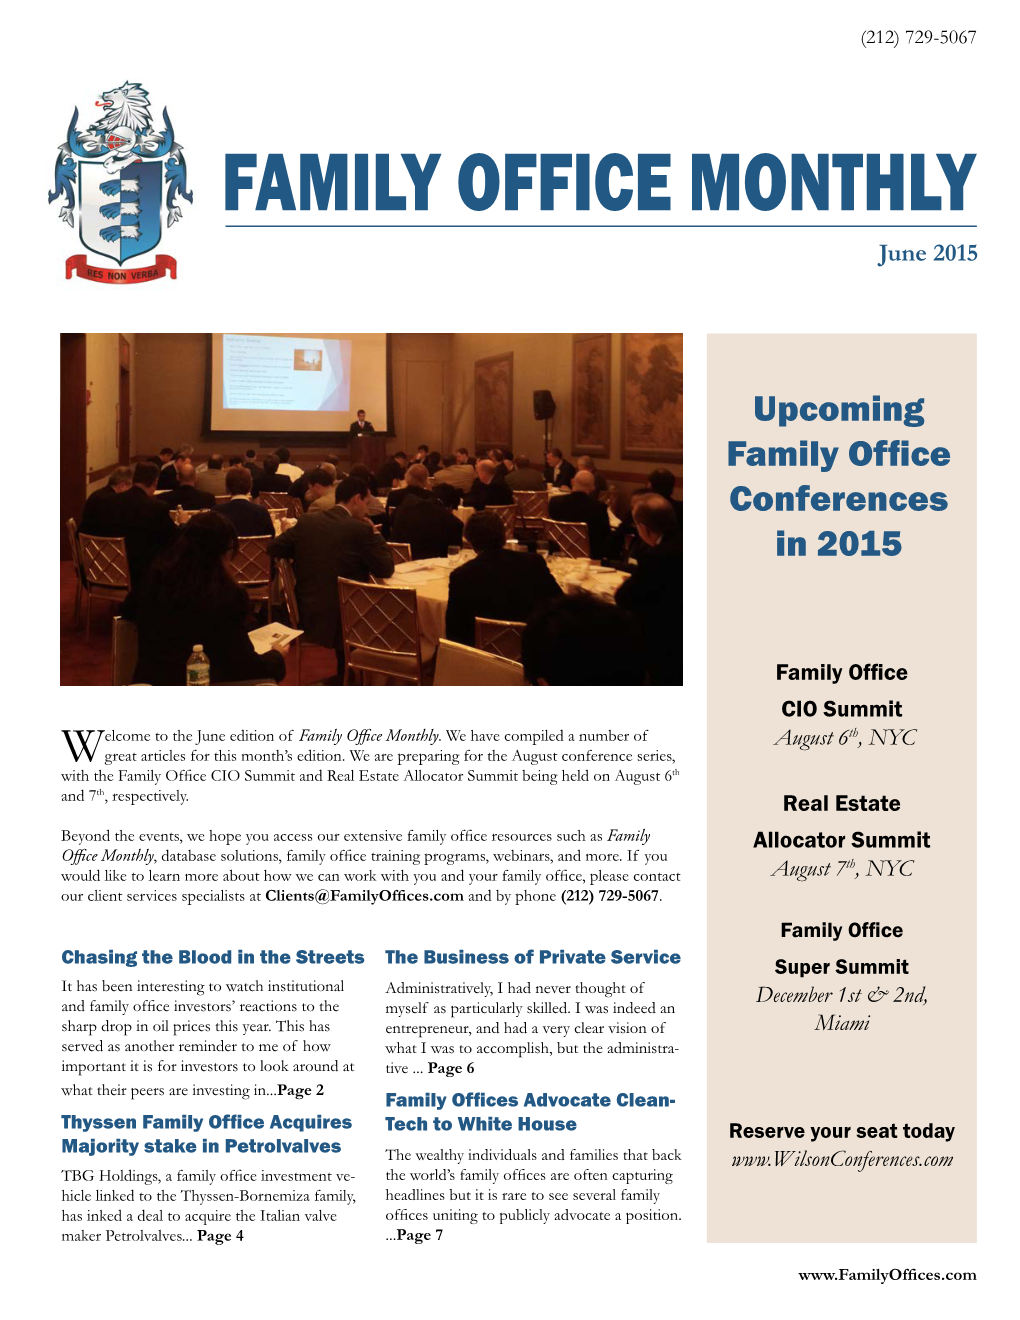 To Read Mary Starkeys Article from the June Issue of Family Office Monthly